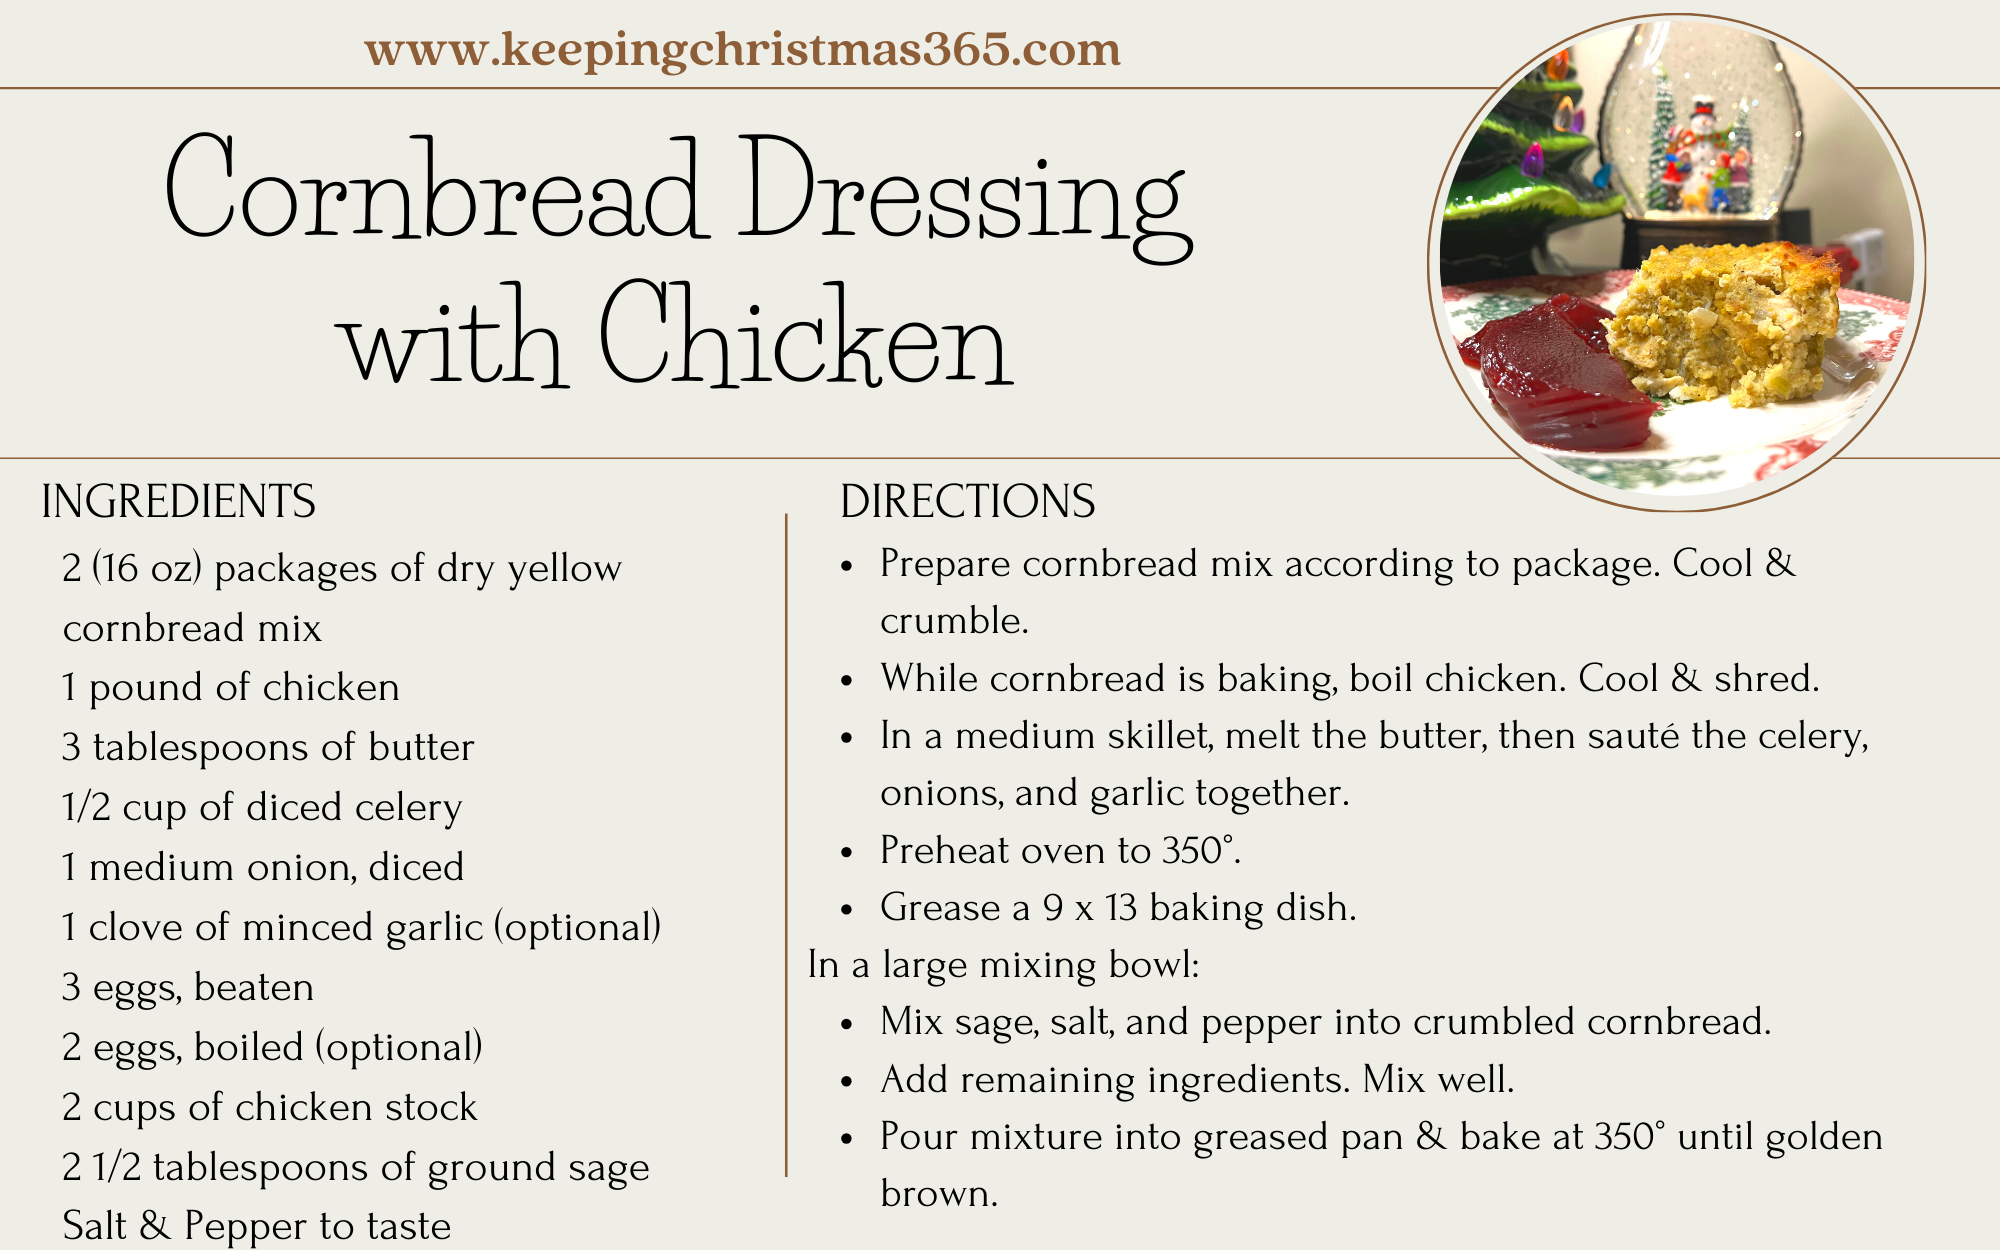 Easy Recipe for Cornbread Dressing with Chicken